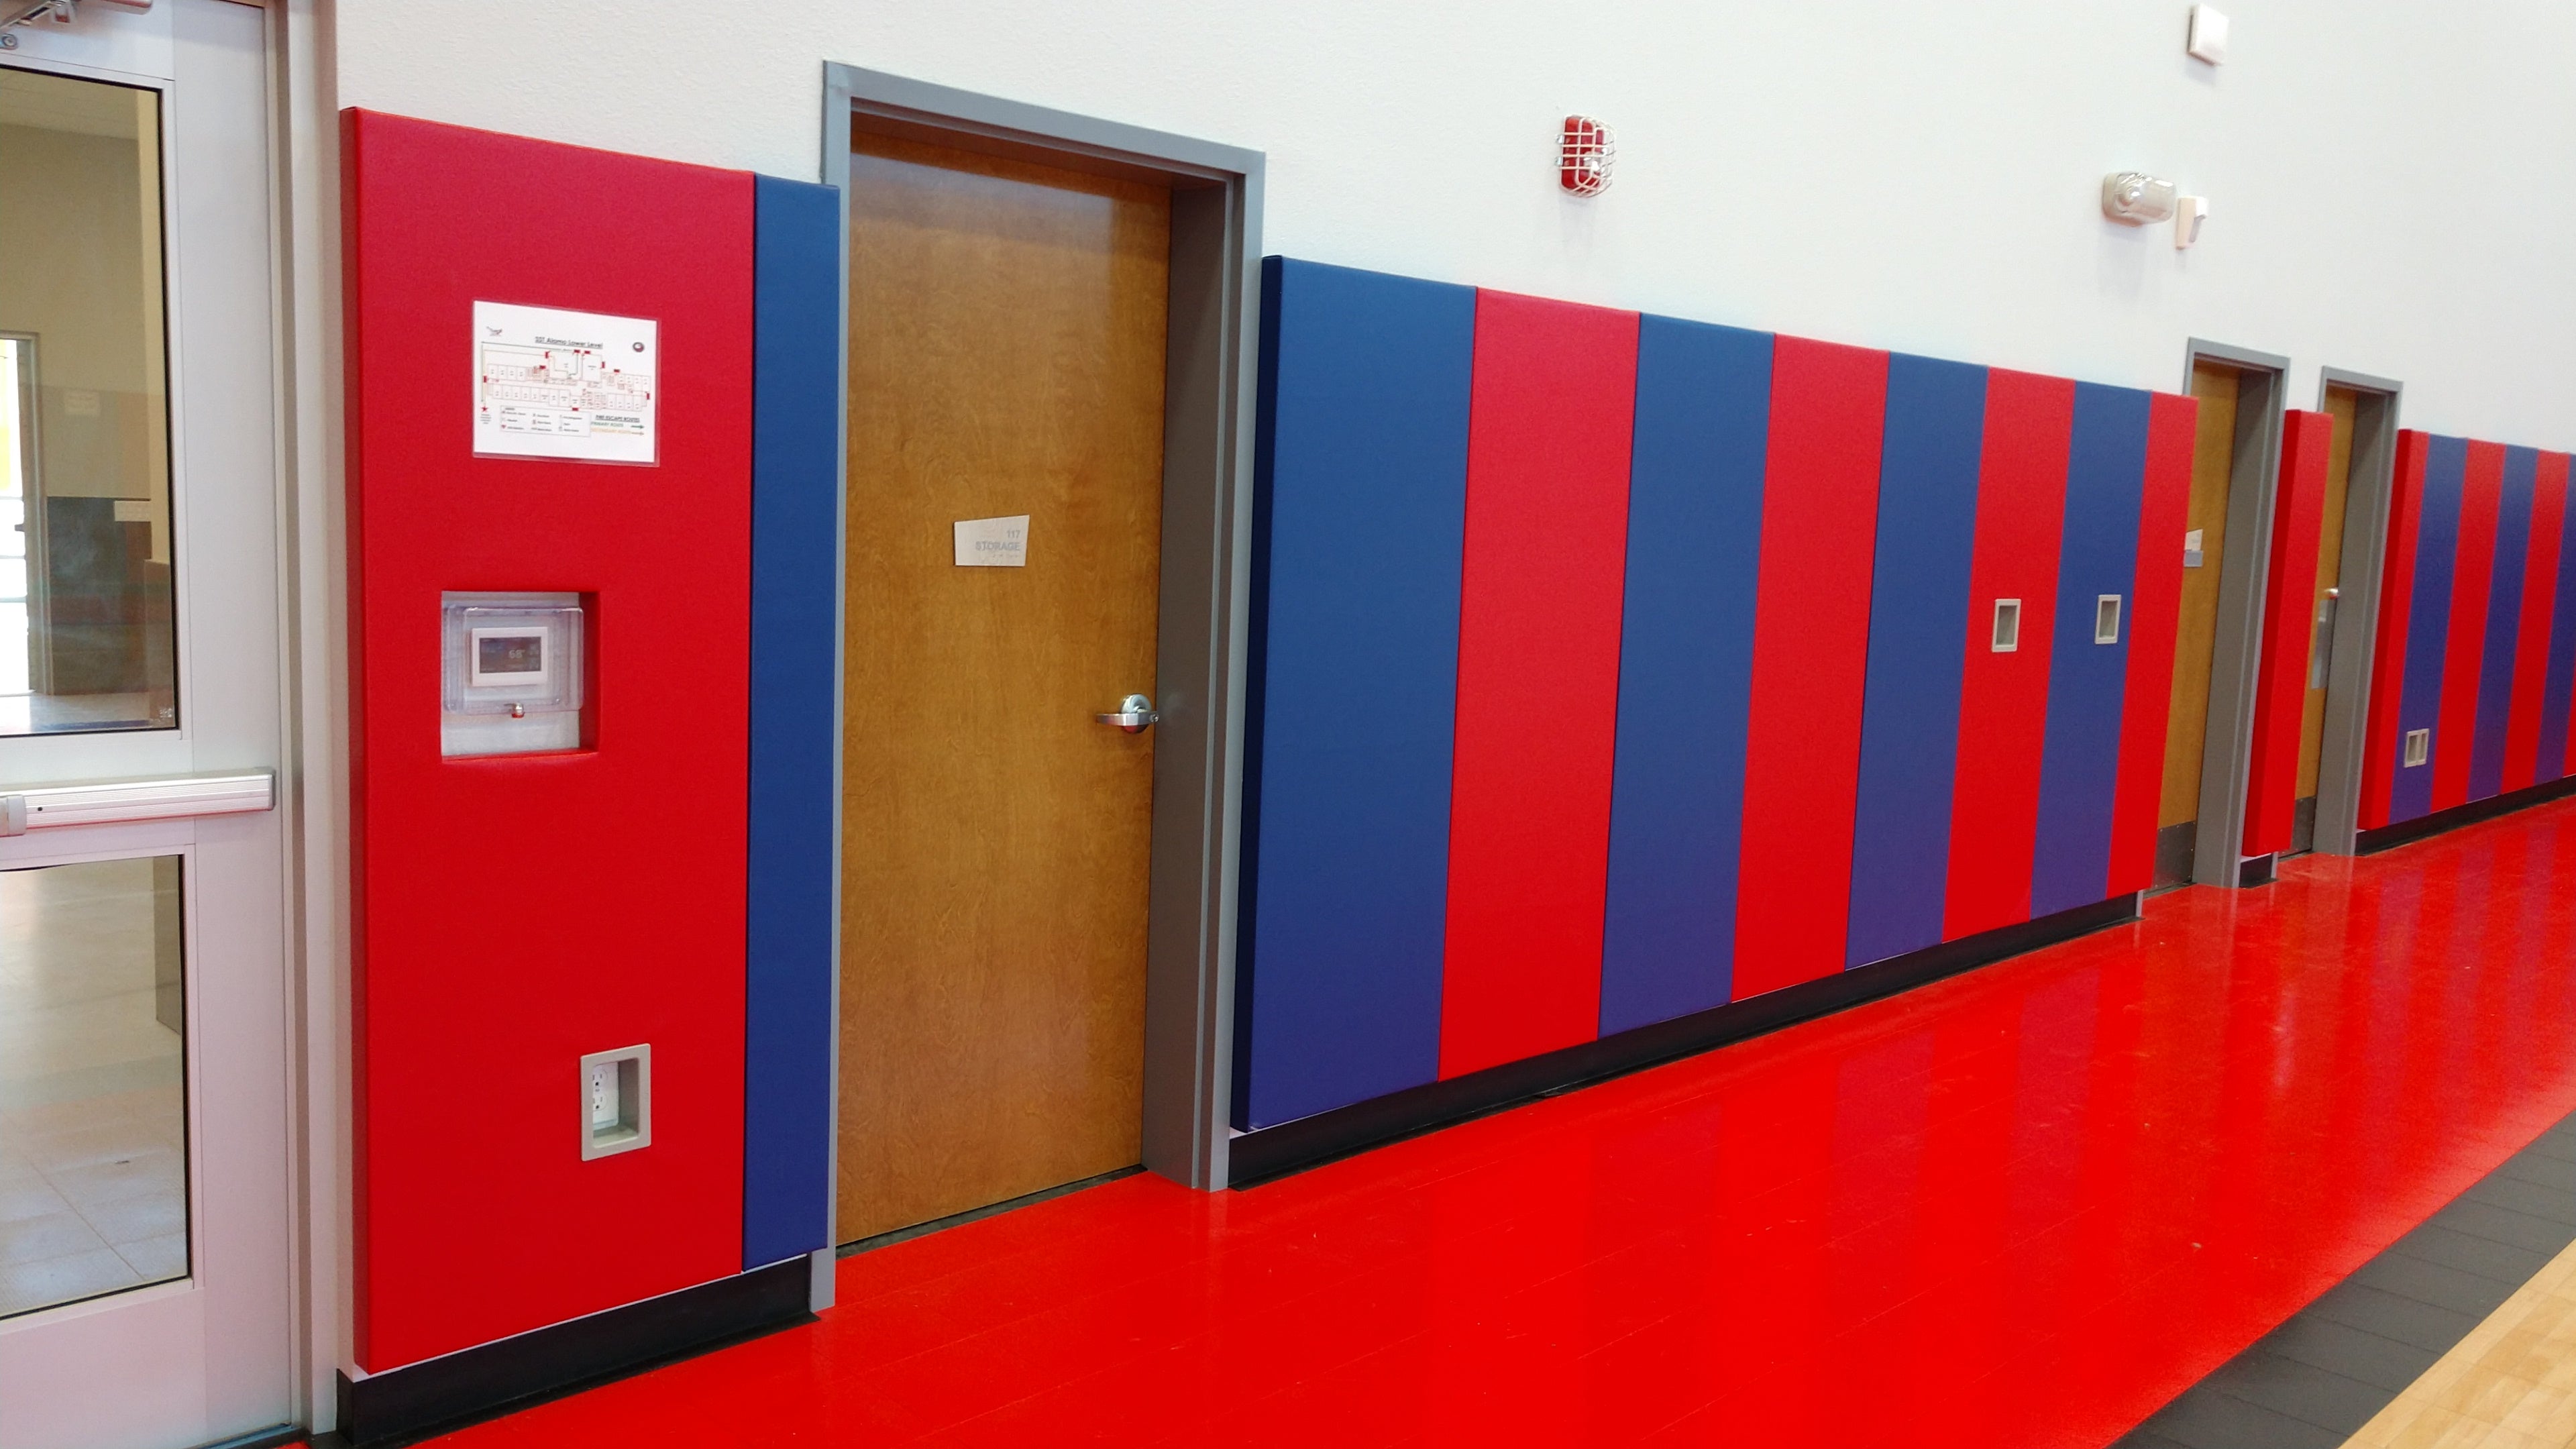 AK Athletics blue and red wall padding, red and blue gym wall pads, gym wall mats, gymnasium protective padding, ak athletics wall padding customer photo